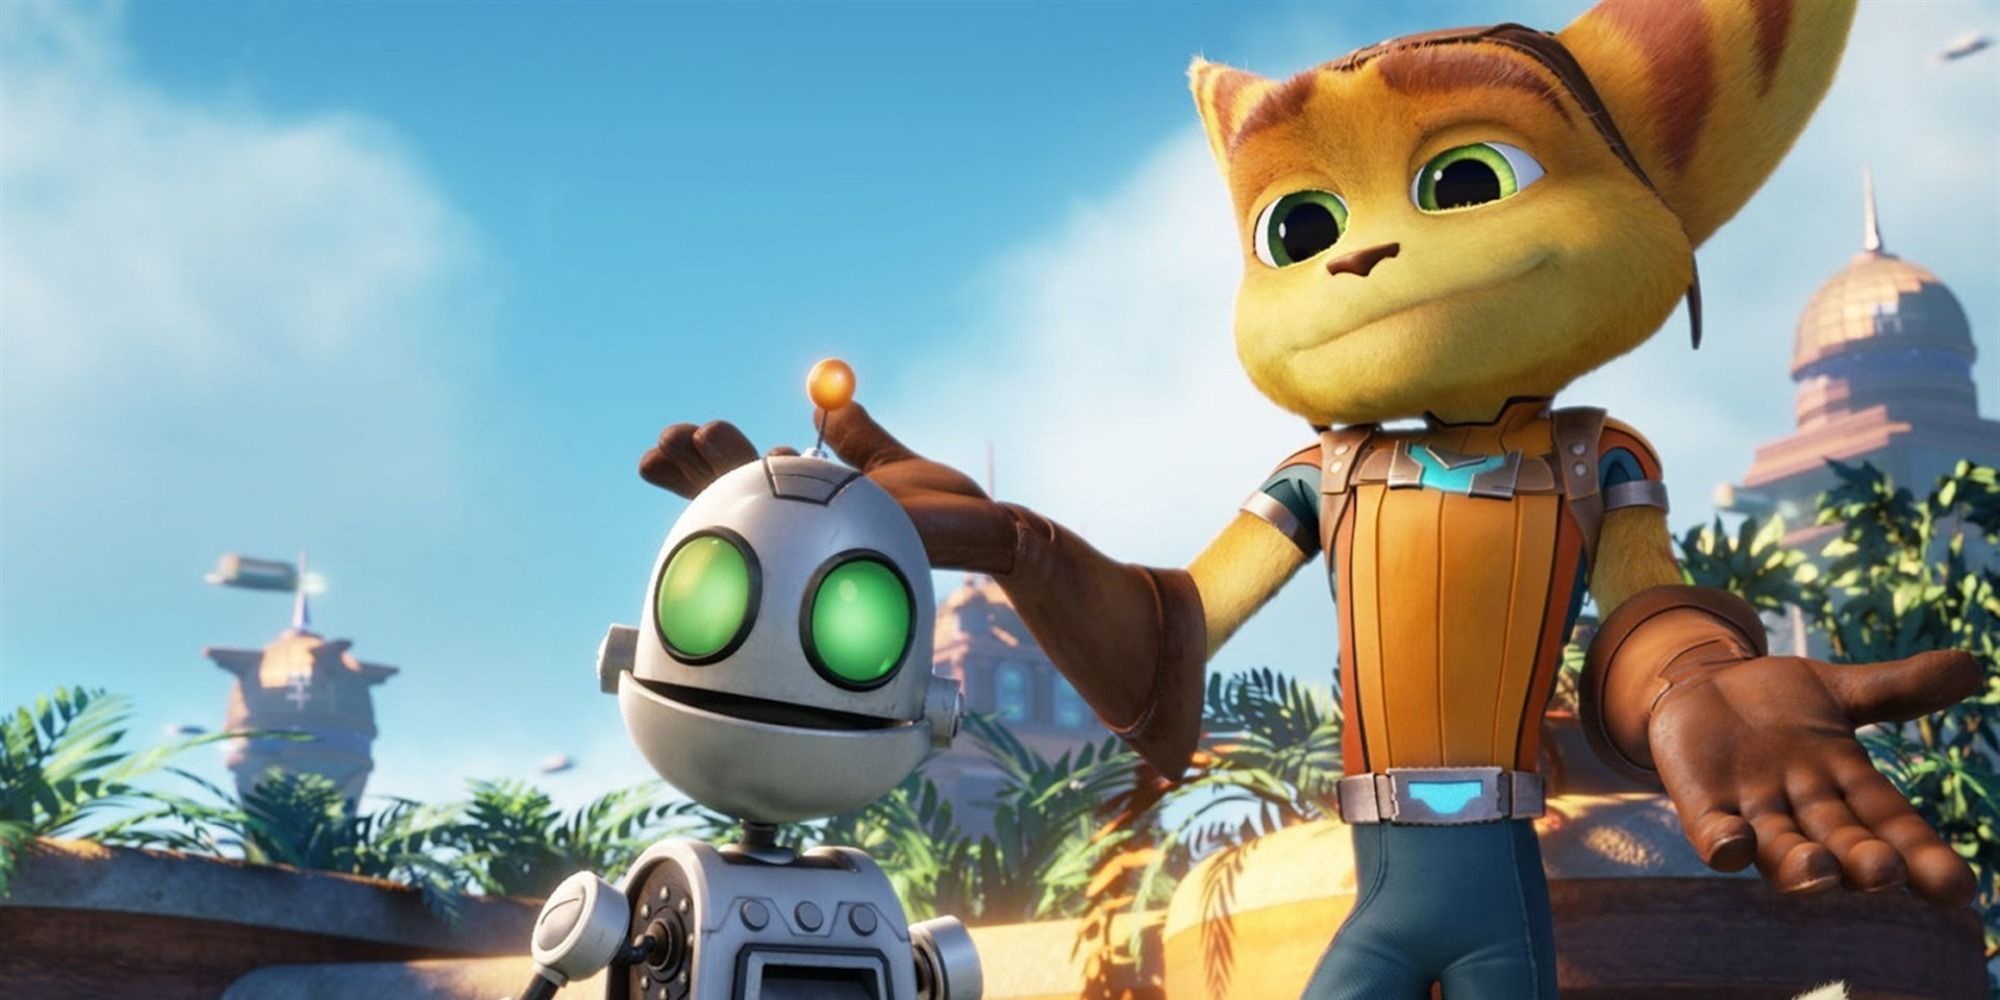 Ratchet & Clank Clank on the left looking inquisitive and Ratchet in the back right shrugging off something